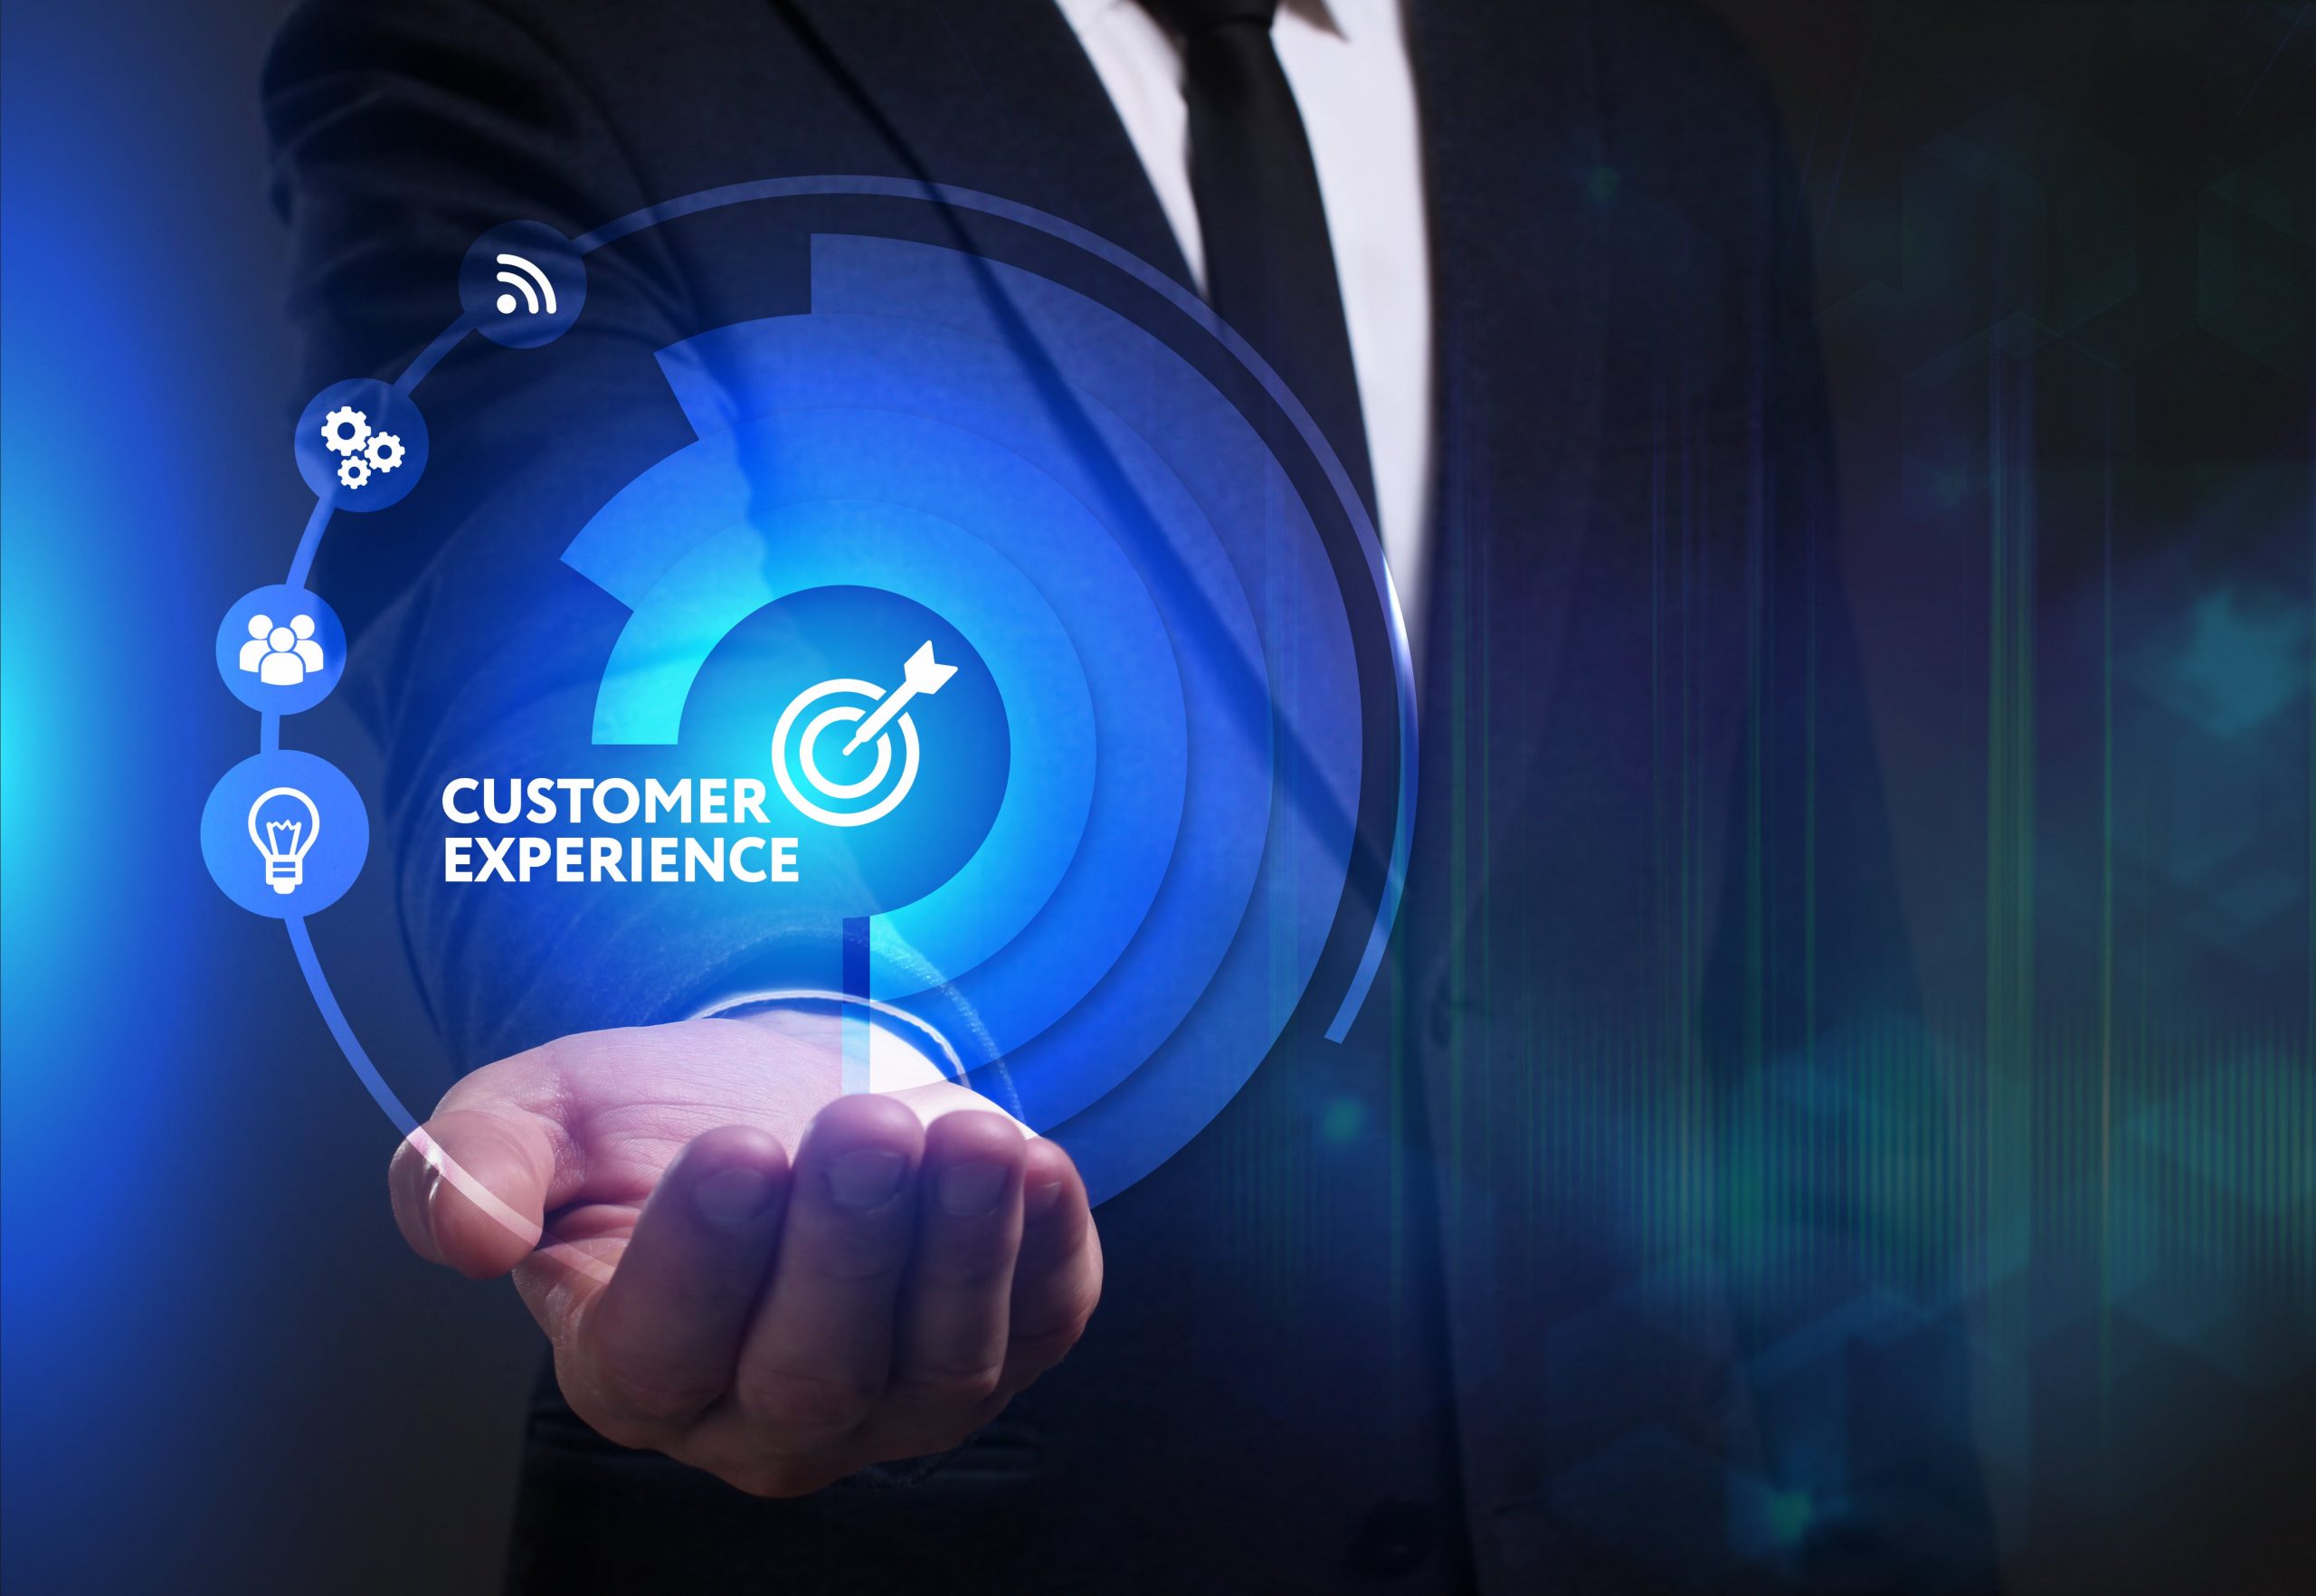 3 Reasons Why Customer Experience Increases Sales